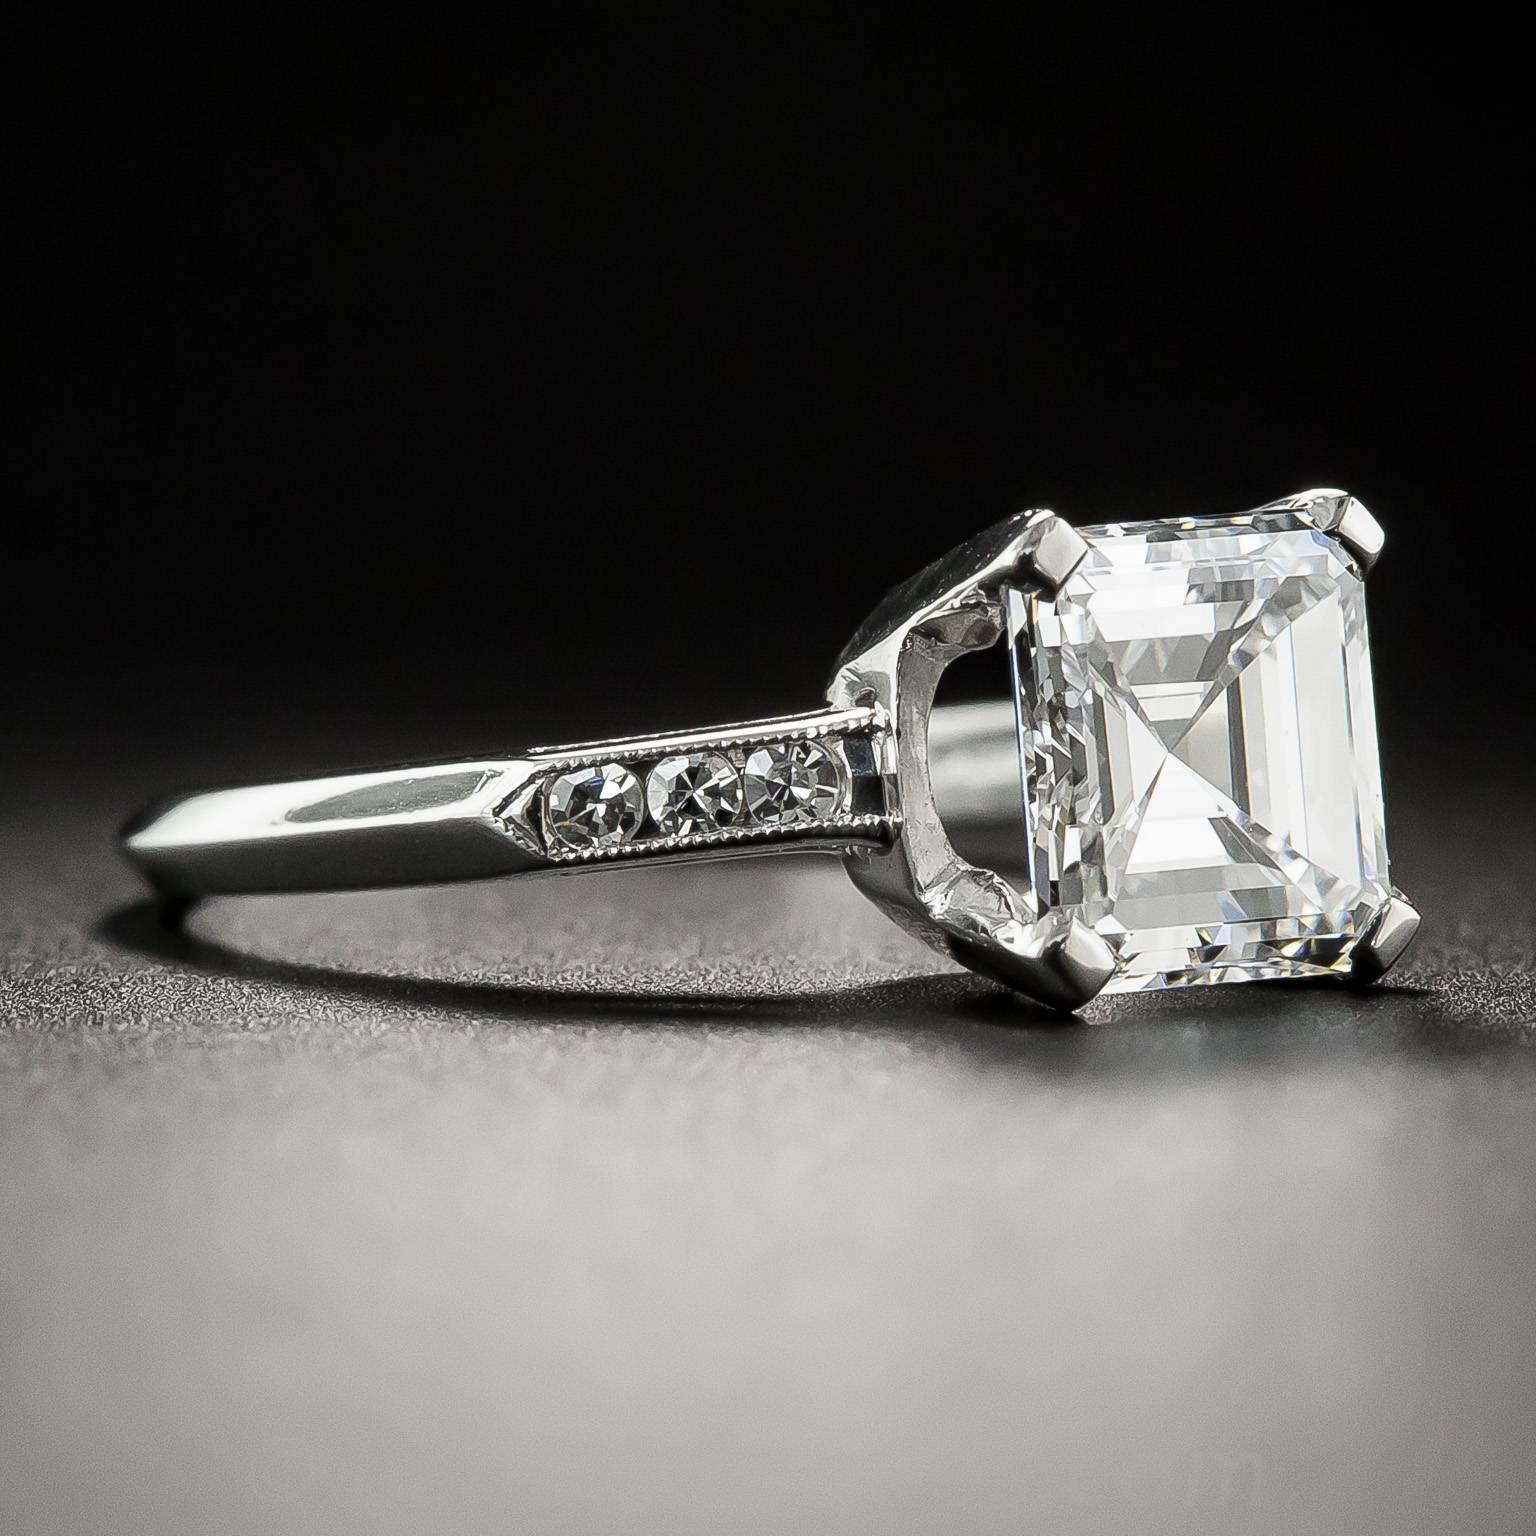 1.95 Carat Asscher Cut Diamond Platinum Ring GIA F VS1 In Excellent Condition For Sale In San Francisco, CA